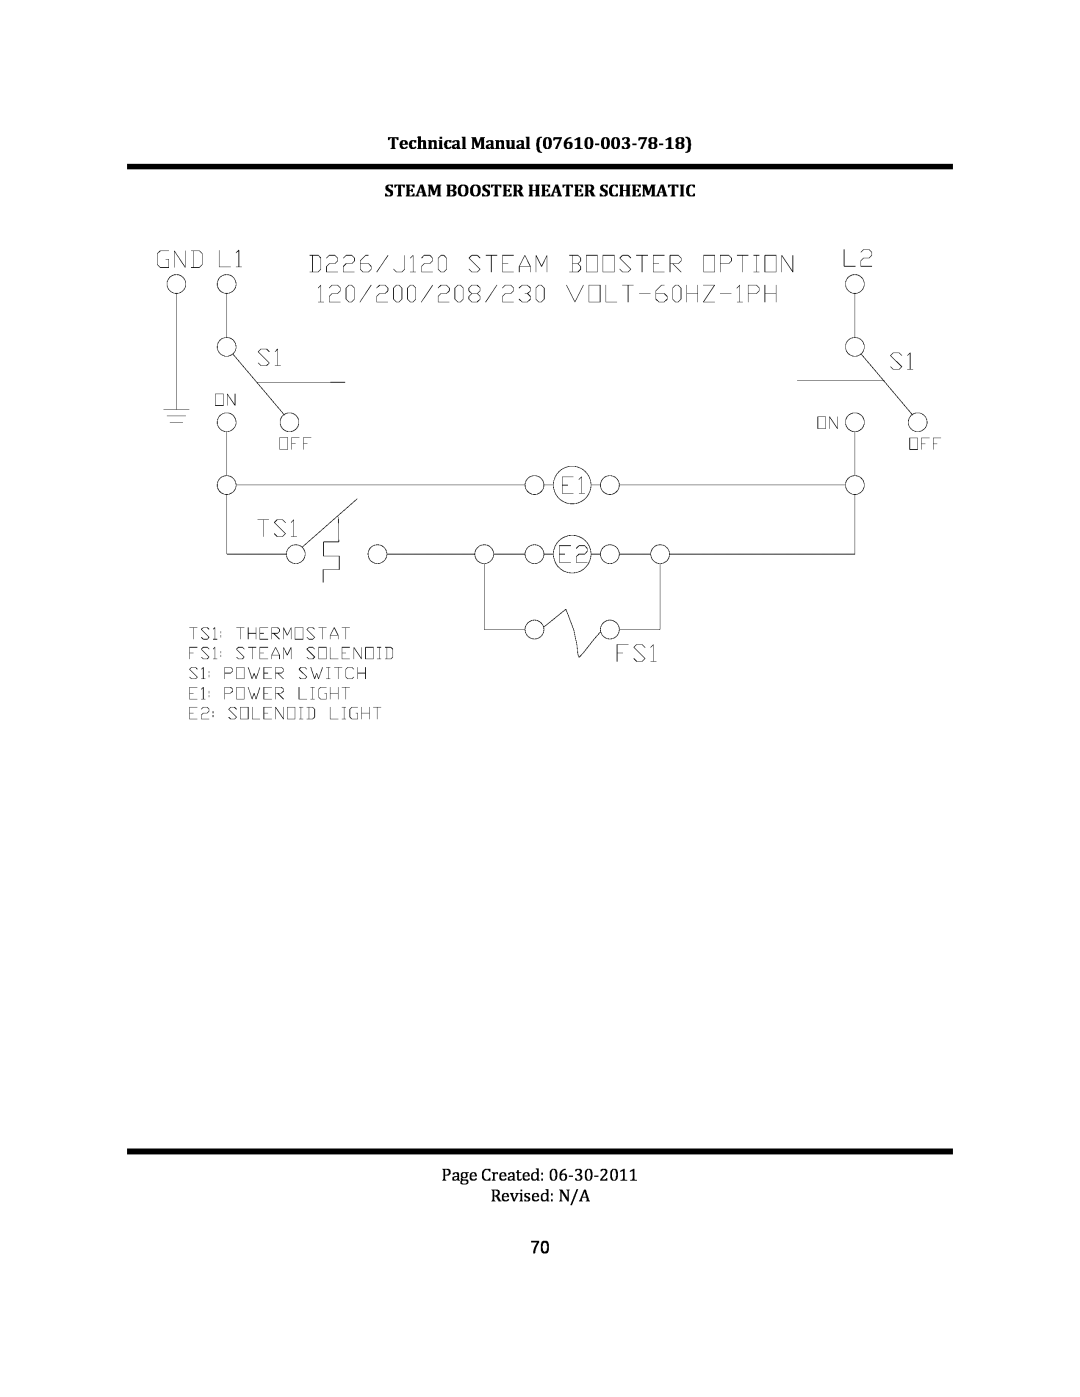 Jackson CREW 66S Technical Manual 07610‐003‐78‐18 STEAM BOOSTER HEATER SCHEMATIC, Page Created 06‐30‐2011 Revised N/A 